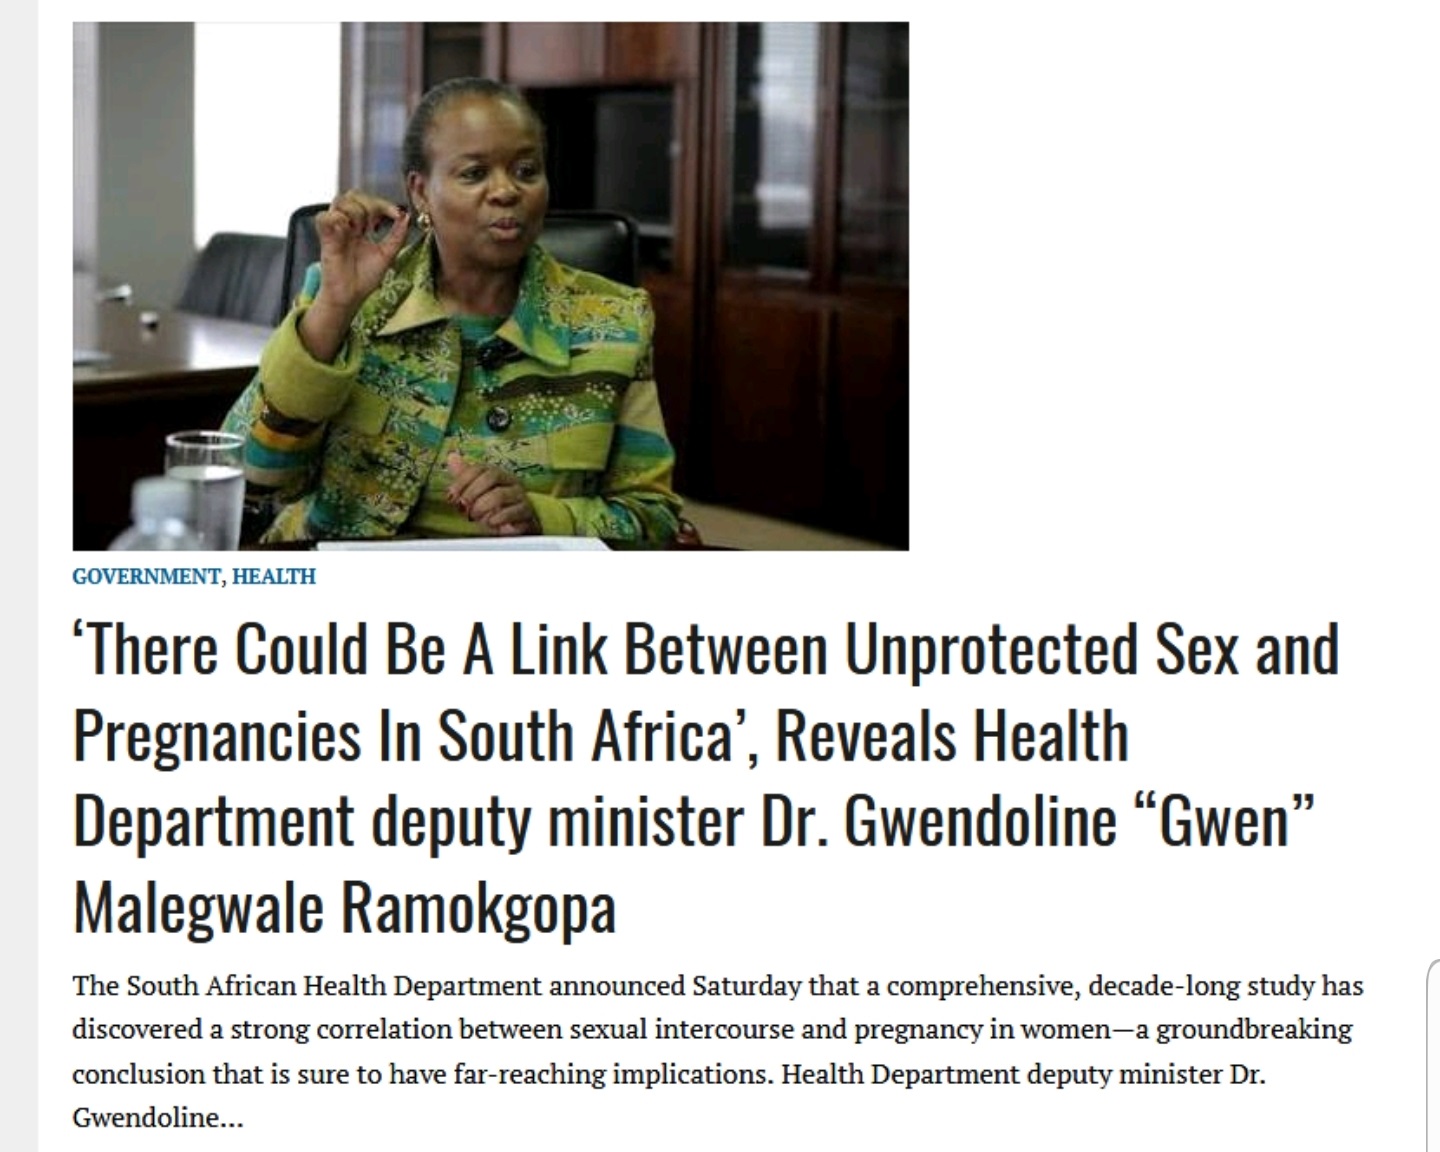 human behavior - Government, Health There Could Be A Link Between Unprotected Sex and Pregnancies In South Africa', Reveals Health Department deputy minister Dr. Gwendoline Gwen Malegwale Ramokgopa The South African Health Department announced Saturday th